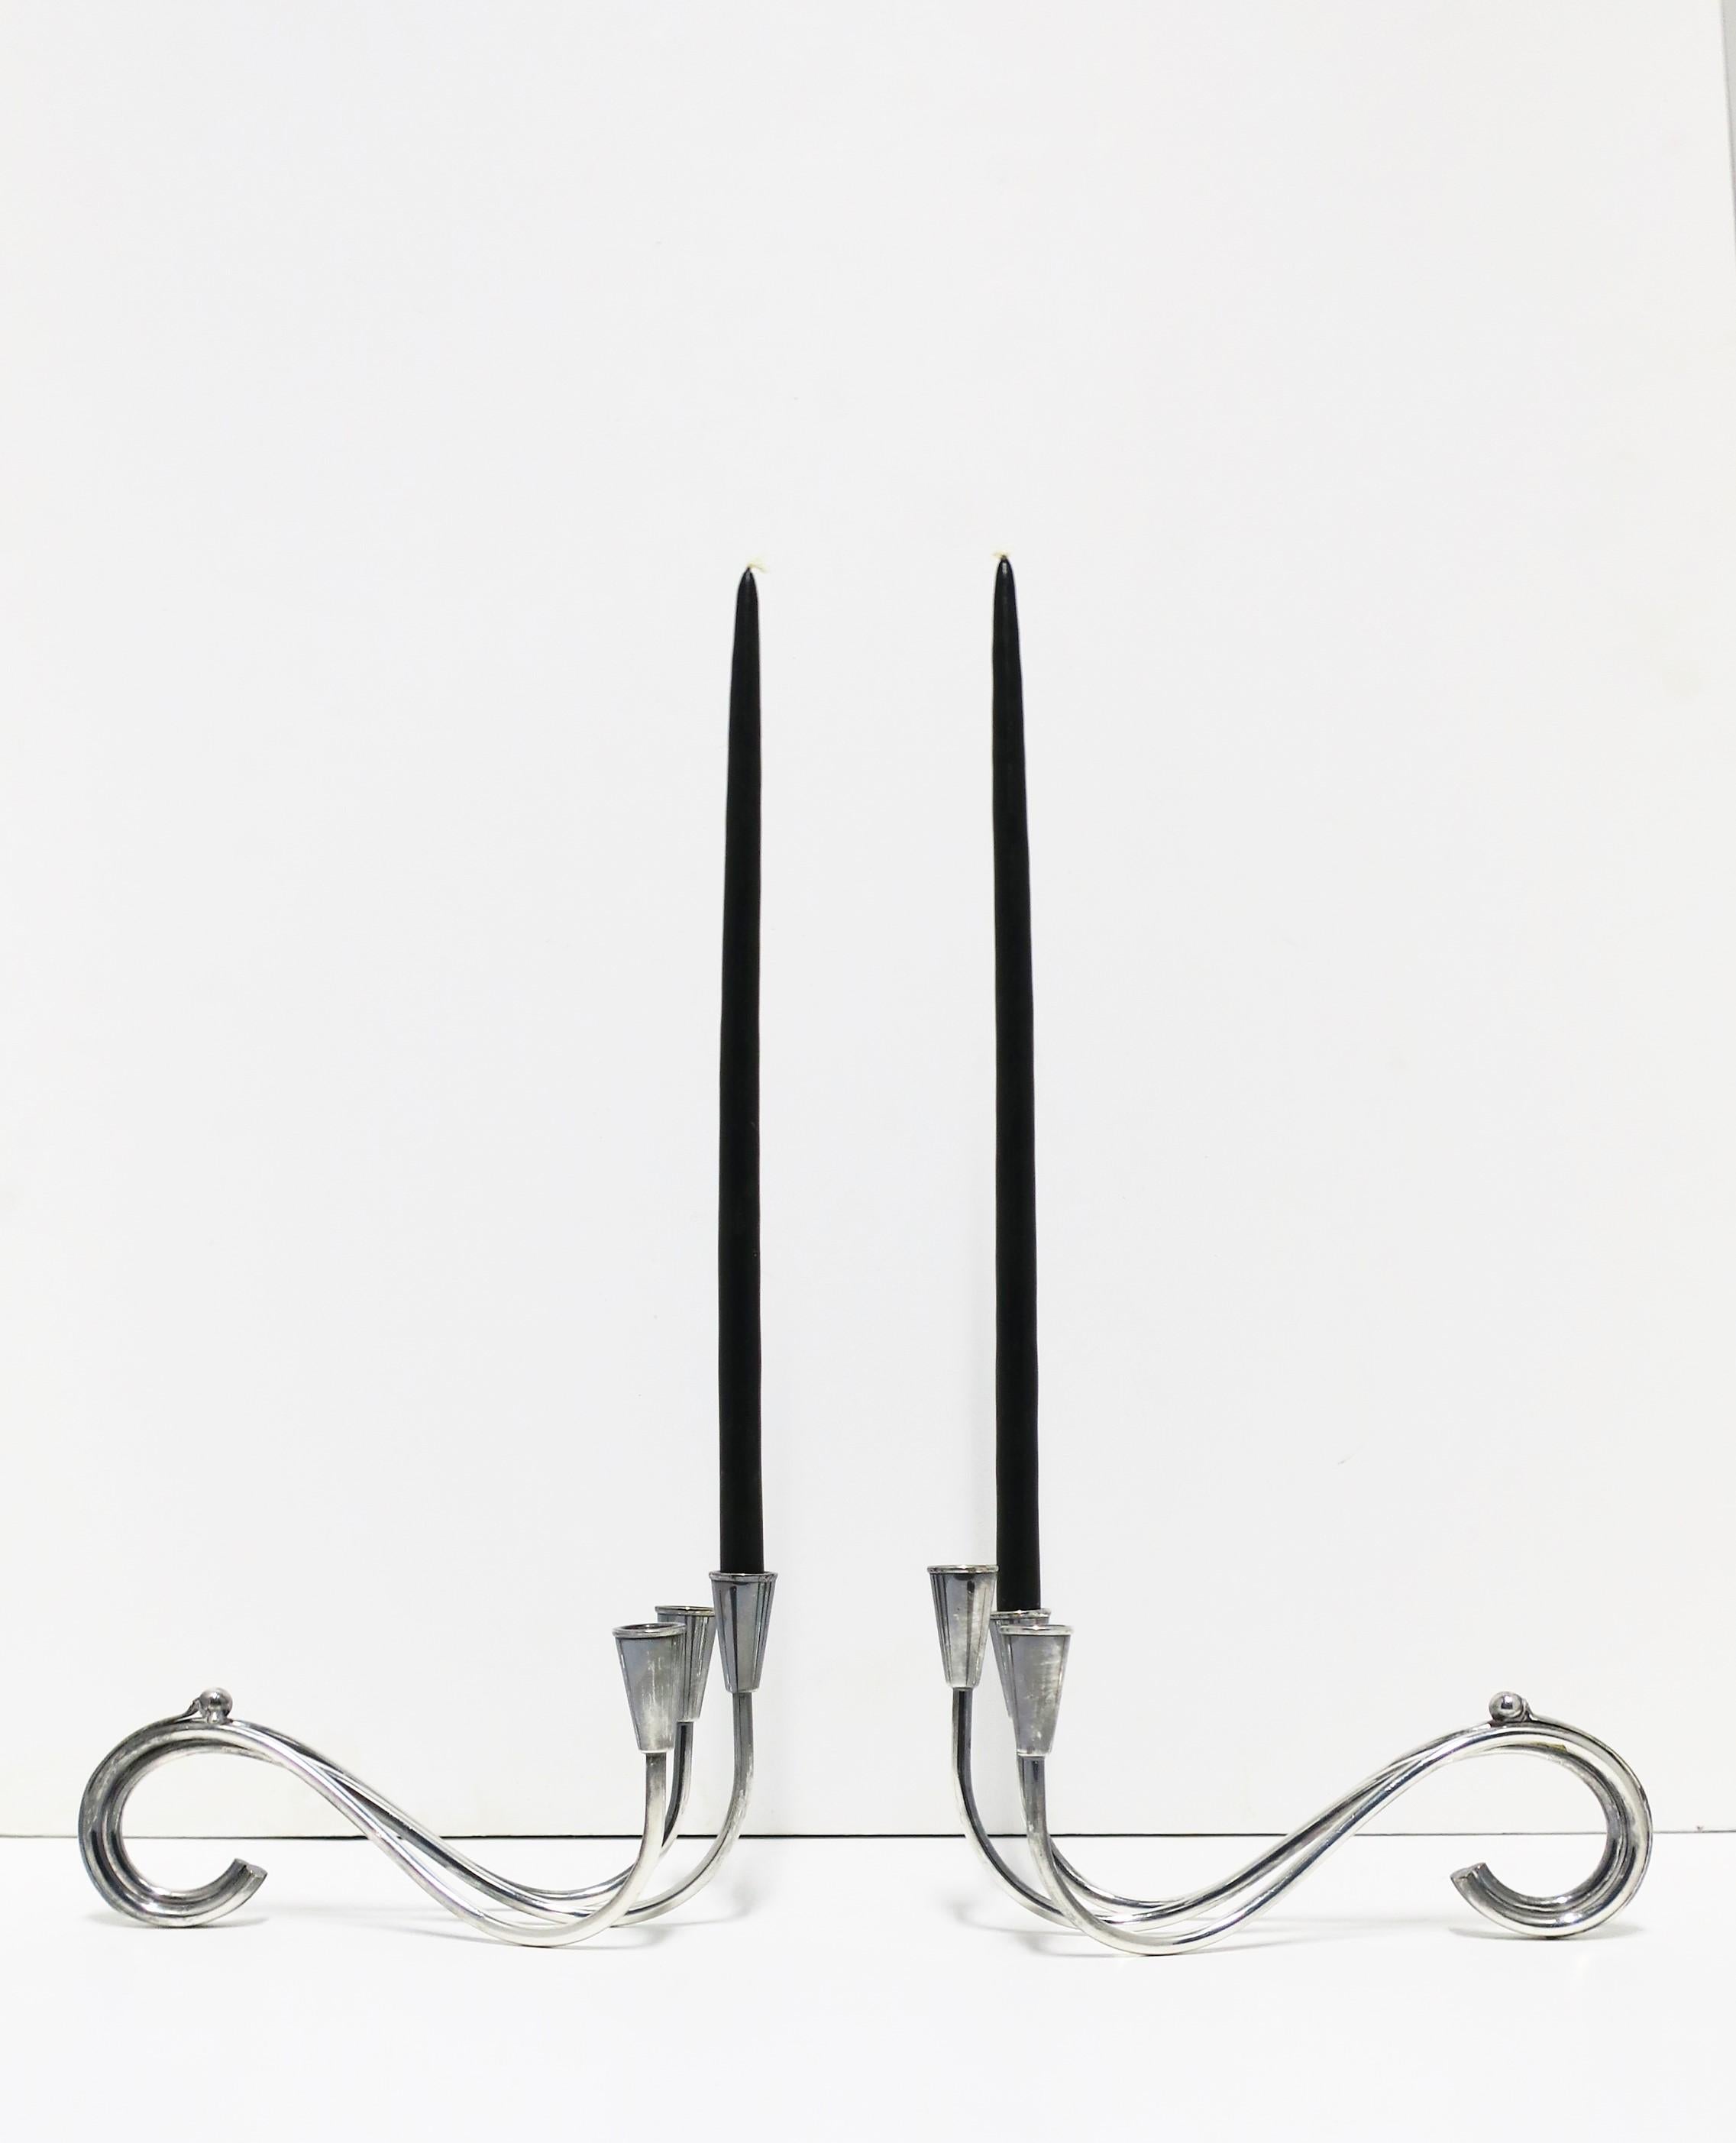 A beautiful pair of Danish Midcentury Modern sterling silver plate candlestick holders/candelabras by designer Carl Frederik Christiansen, circa mid-20th century, Denmark. Both are marked with designers' initials 